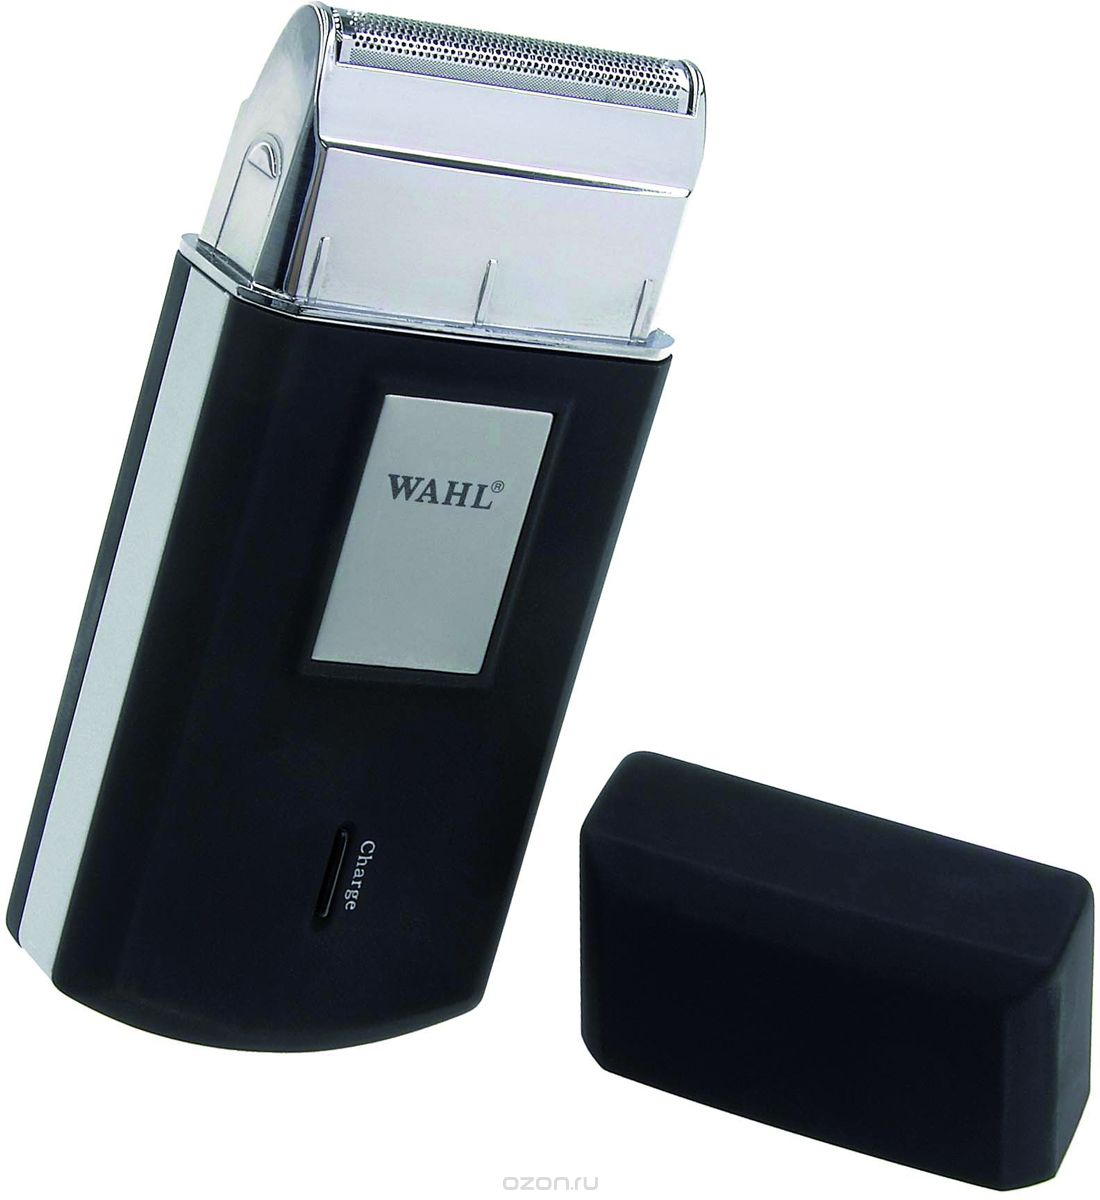  Wahl Mobile 3615-0471 / 3615-1016